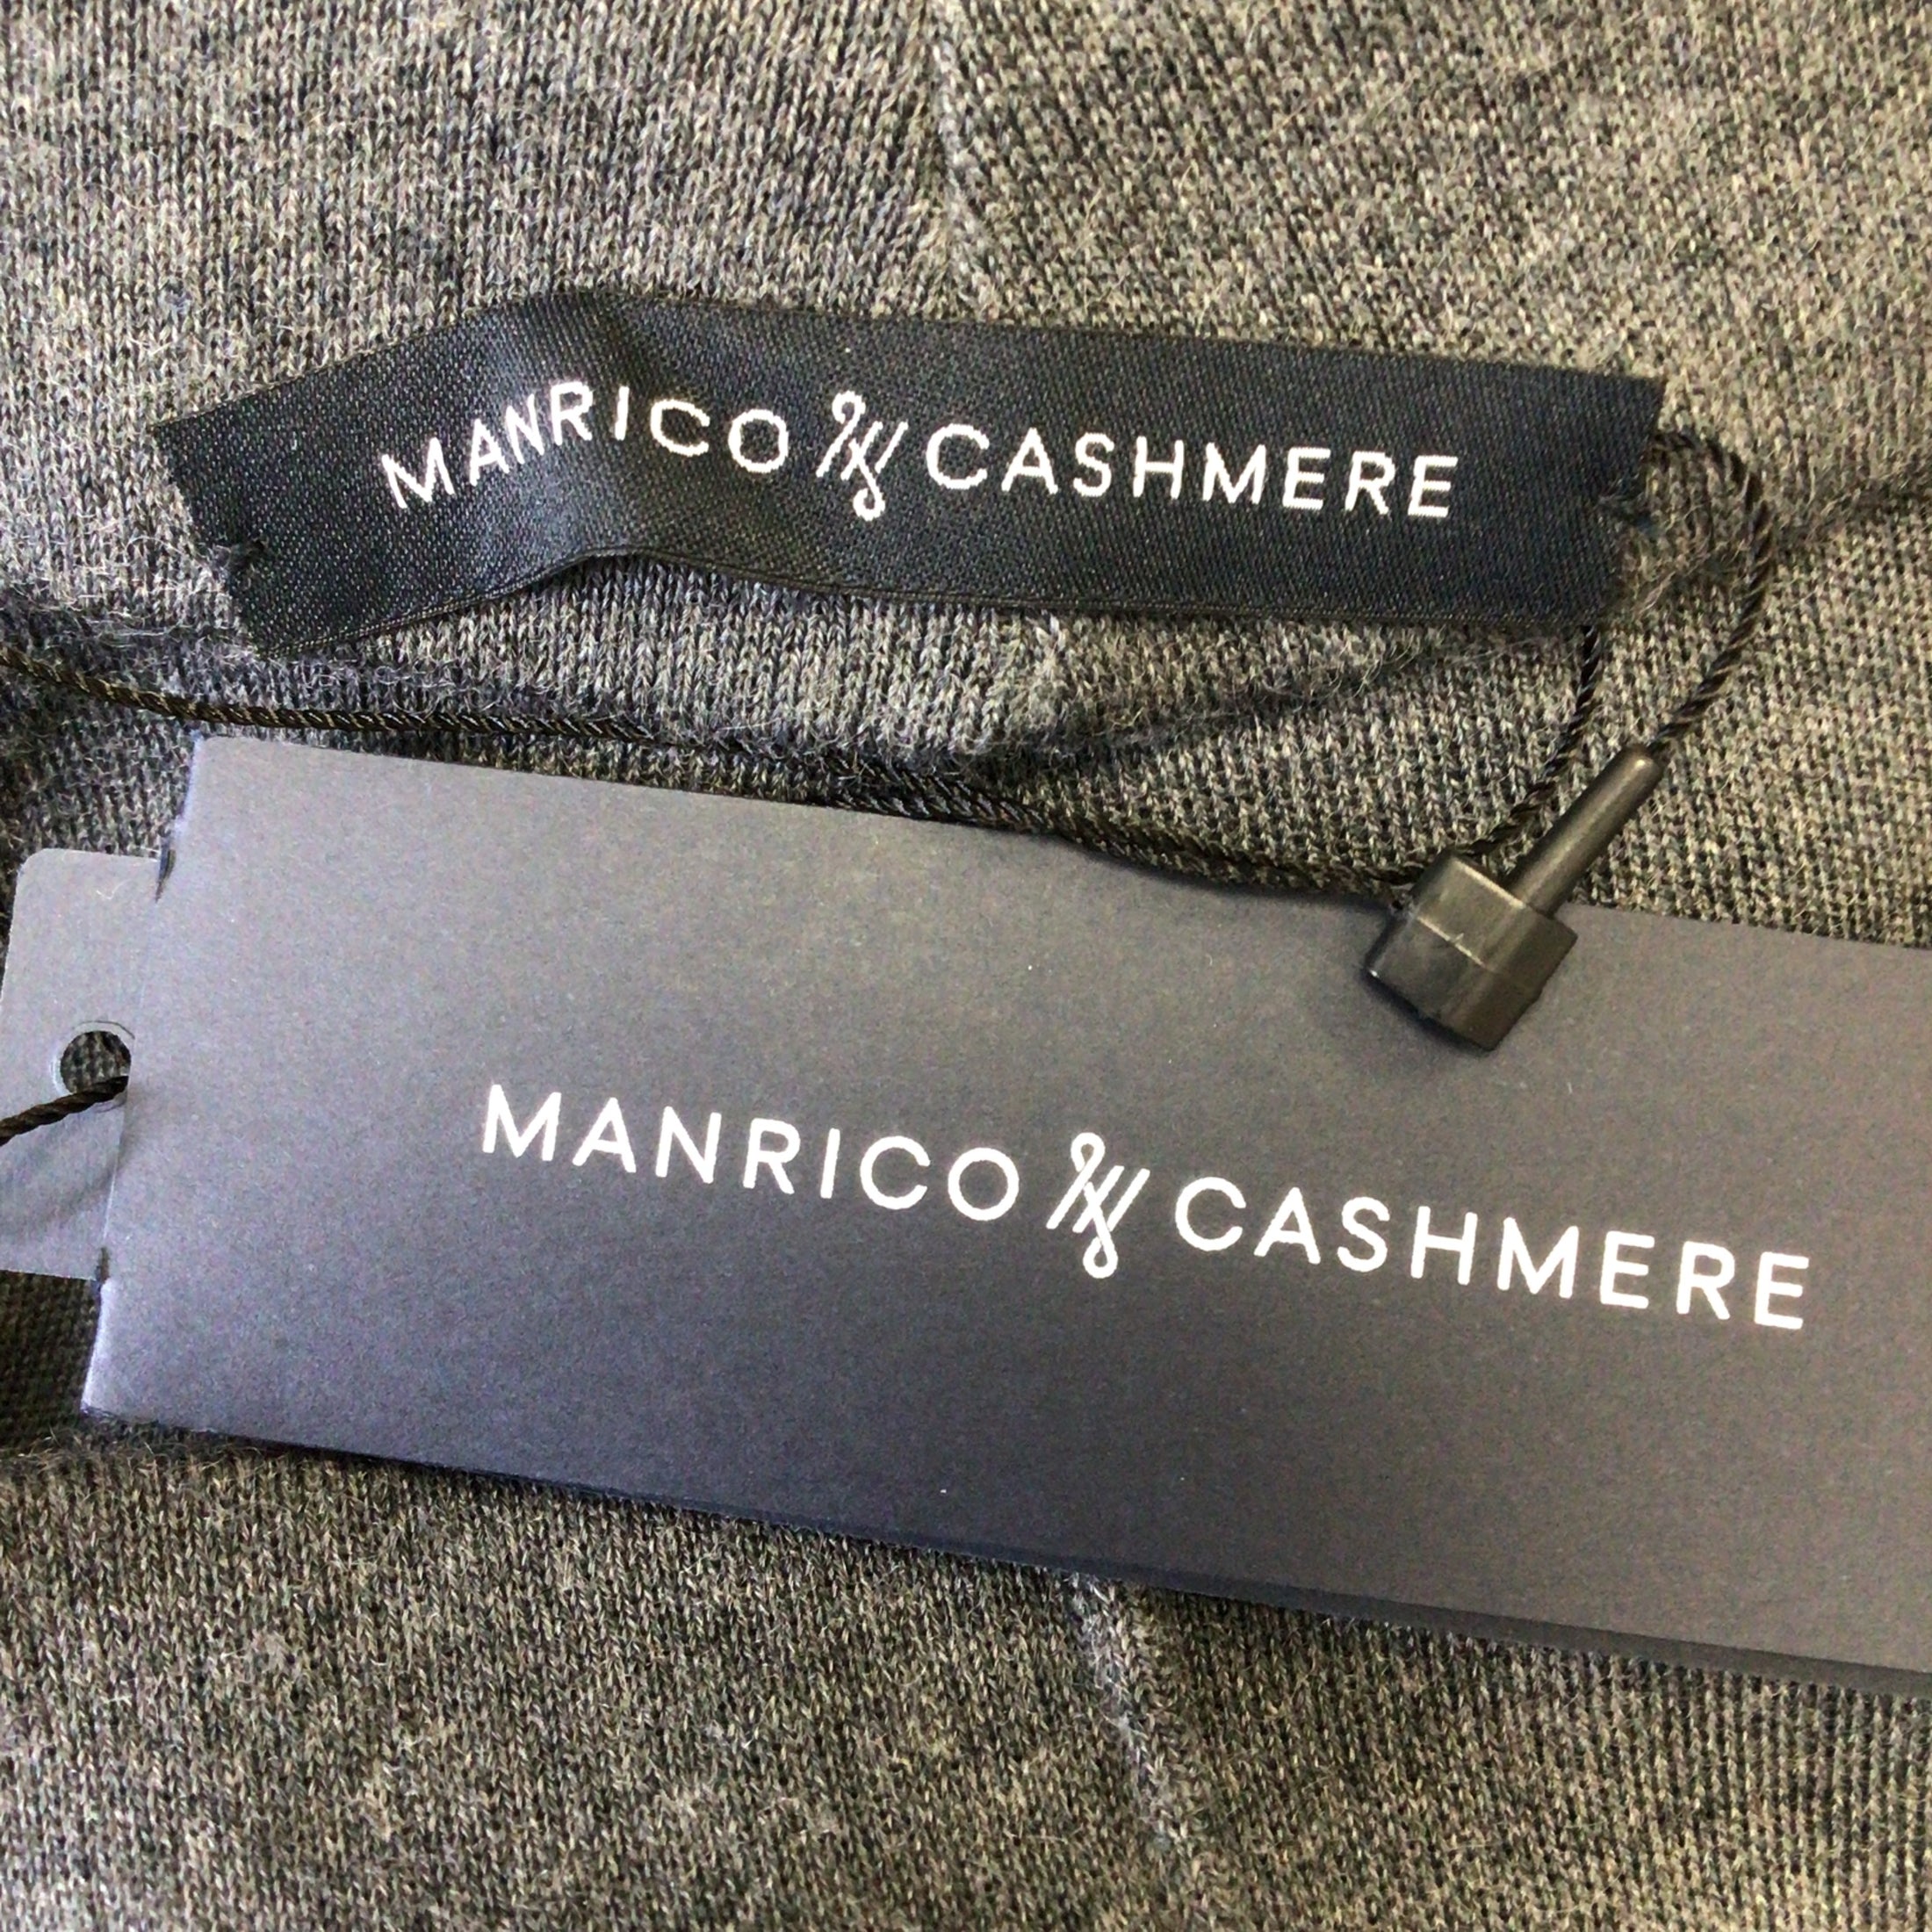 Manrico Cashmere Charcoal Grey Cuffed Cashmere Knit Pants